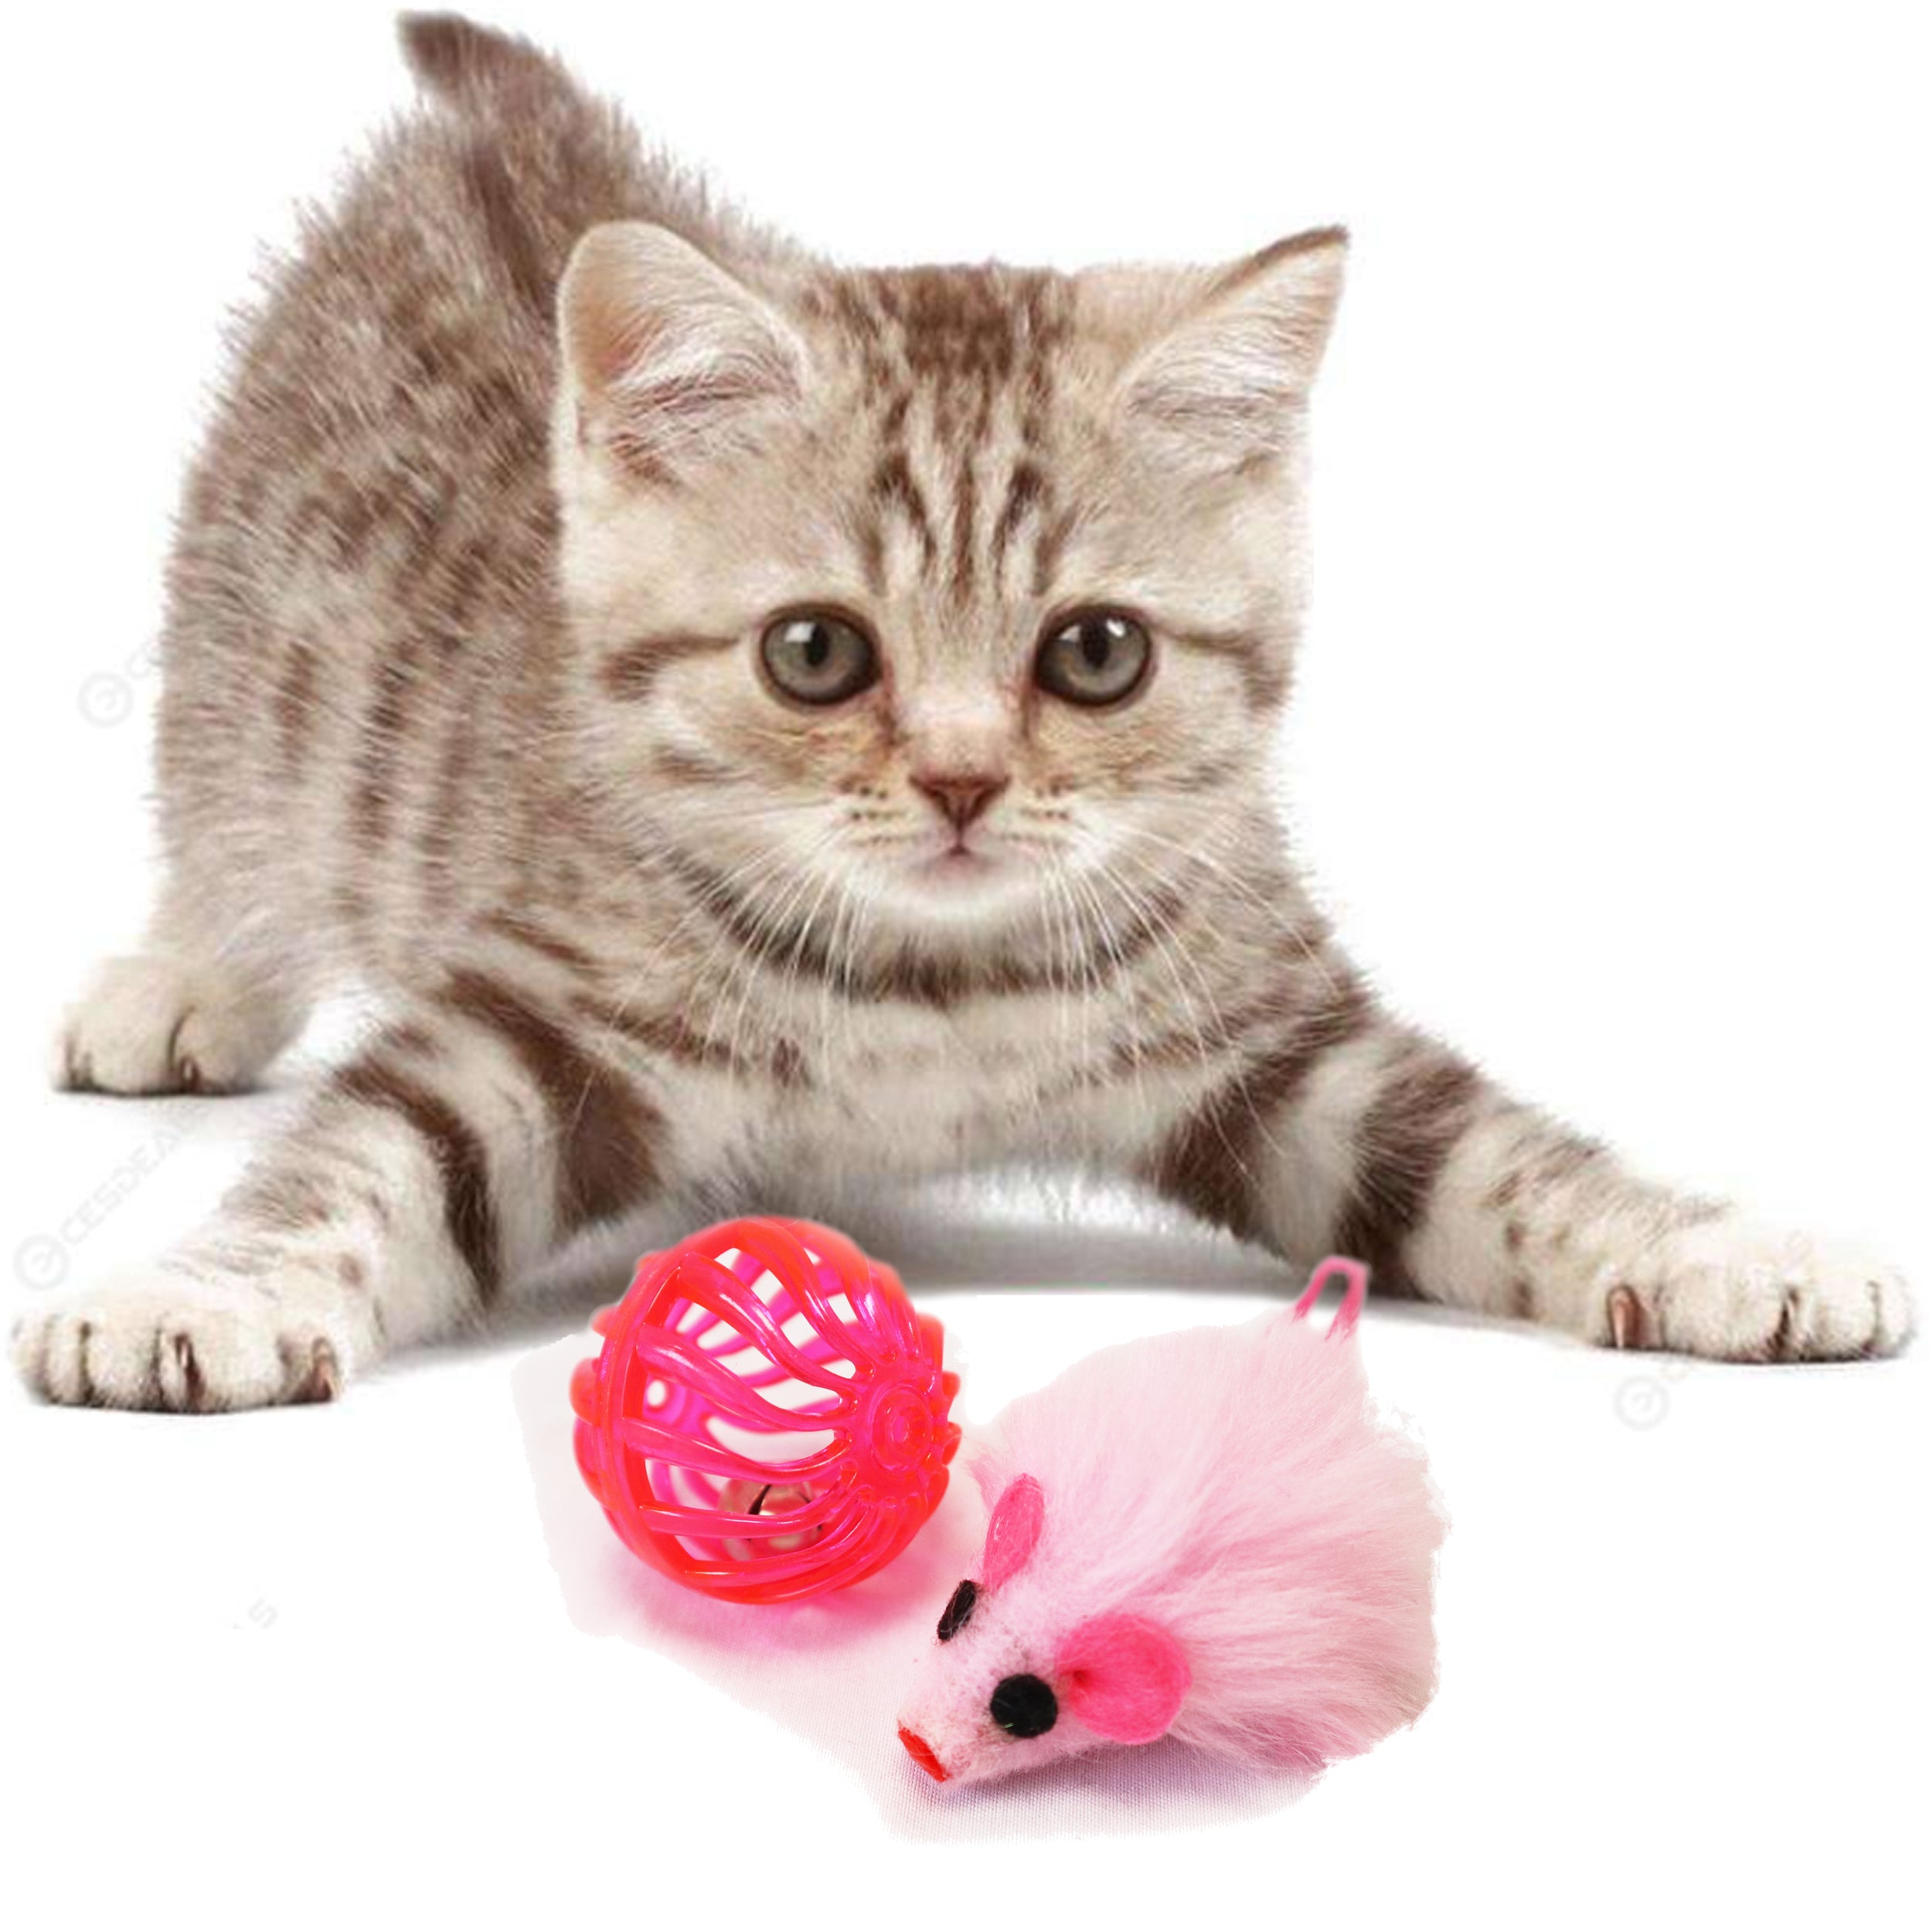 Pink Multitextured Ball Ball with one Furry Pink mouse with String Tail 2 piece one pack cat toy for cats and kittens fun exciting toy. Image with kitten playing 